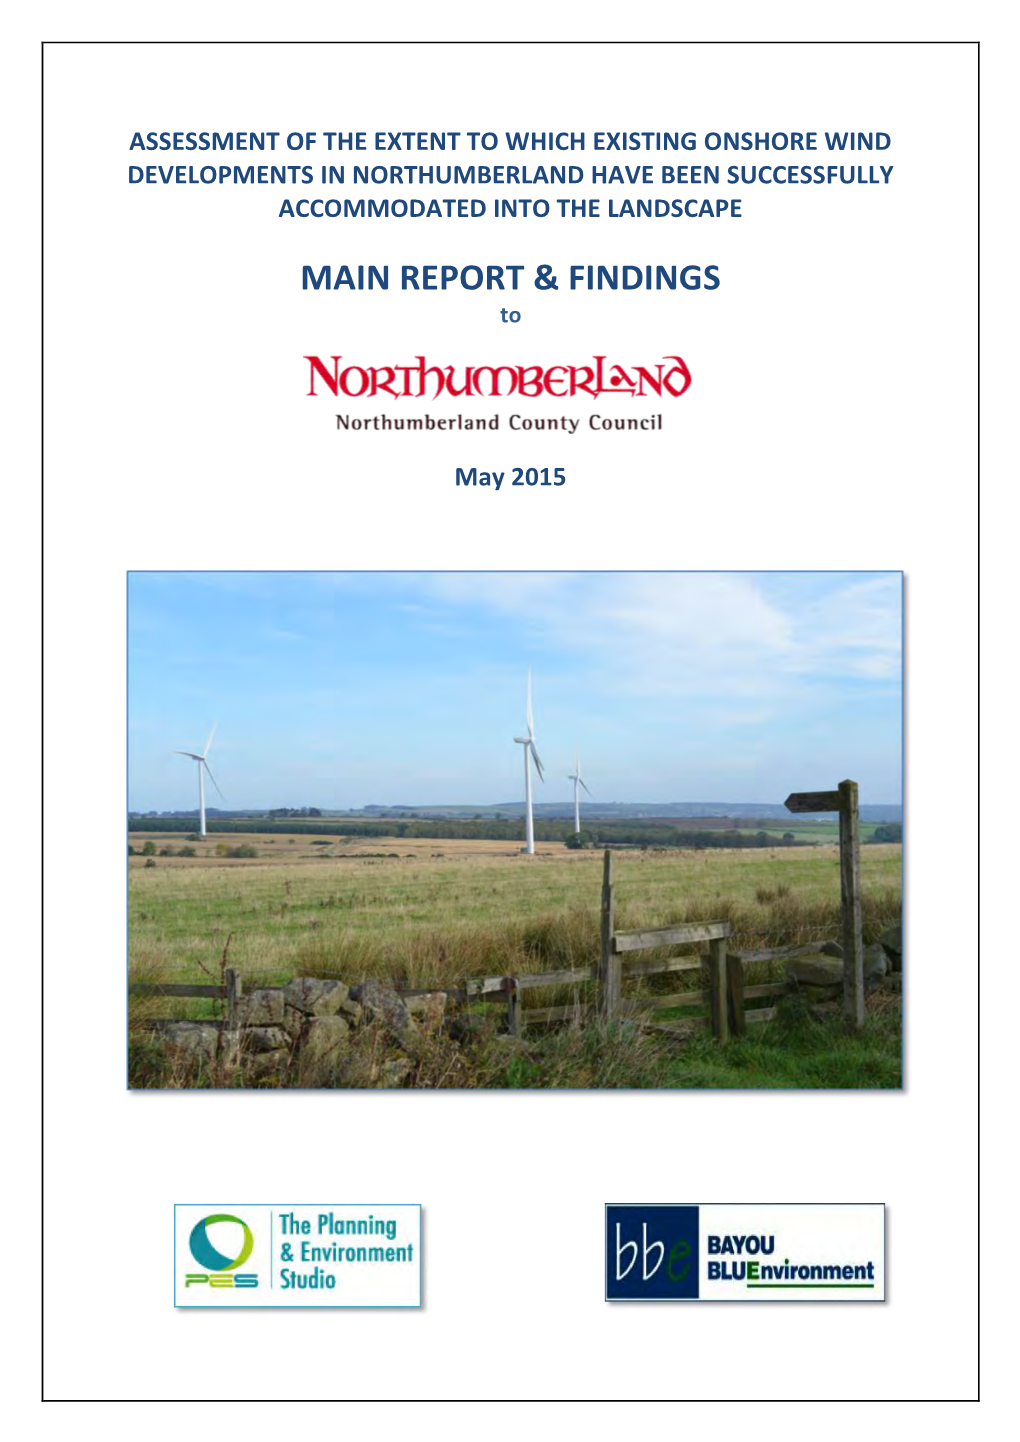 Landscape and Operational Wind Farms Study